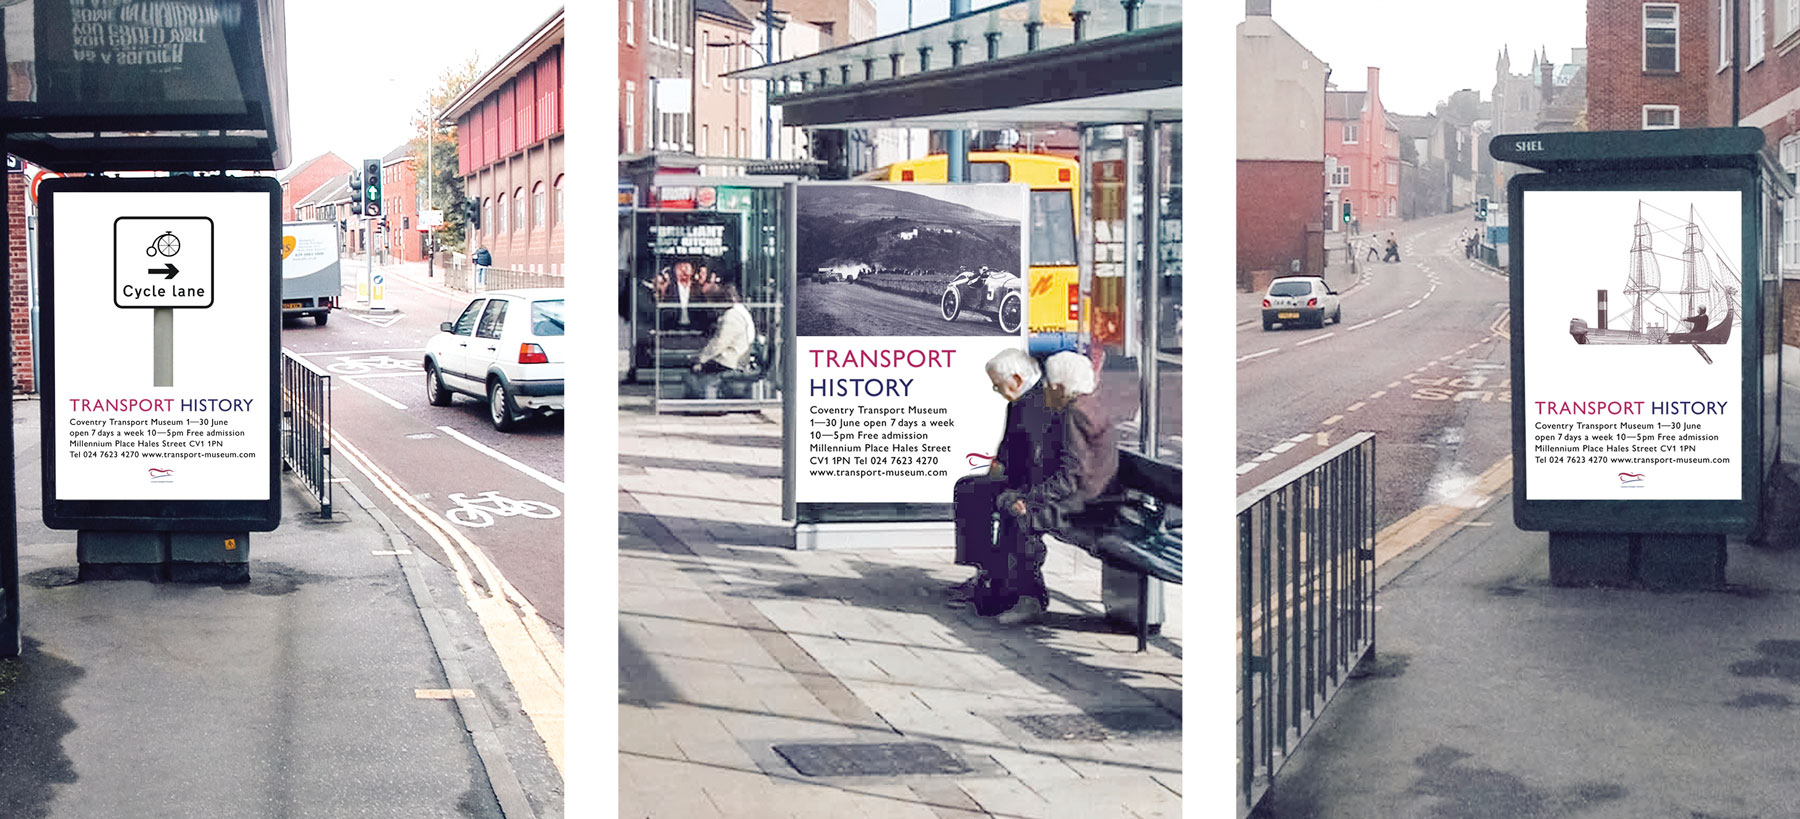 Poster/campaign design and photography. Photograph of poster designs in the street on bus stop signs